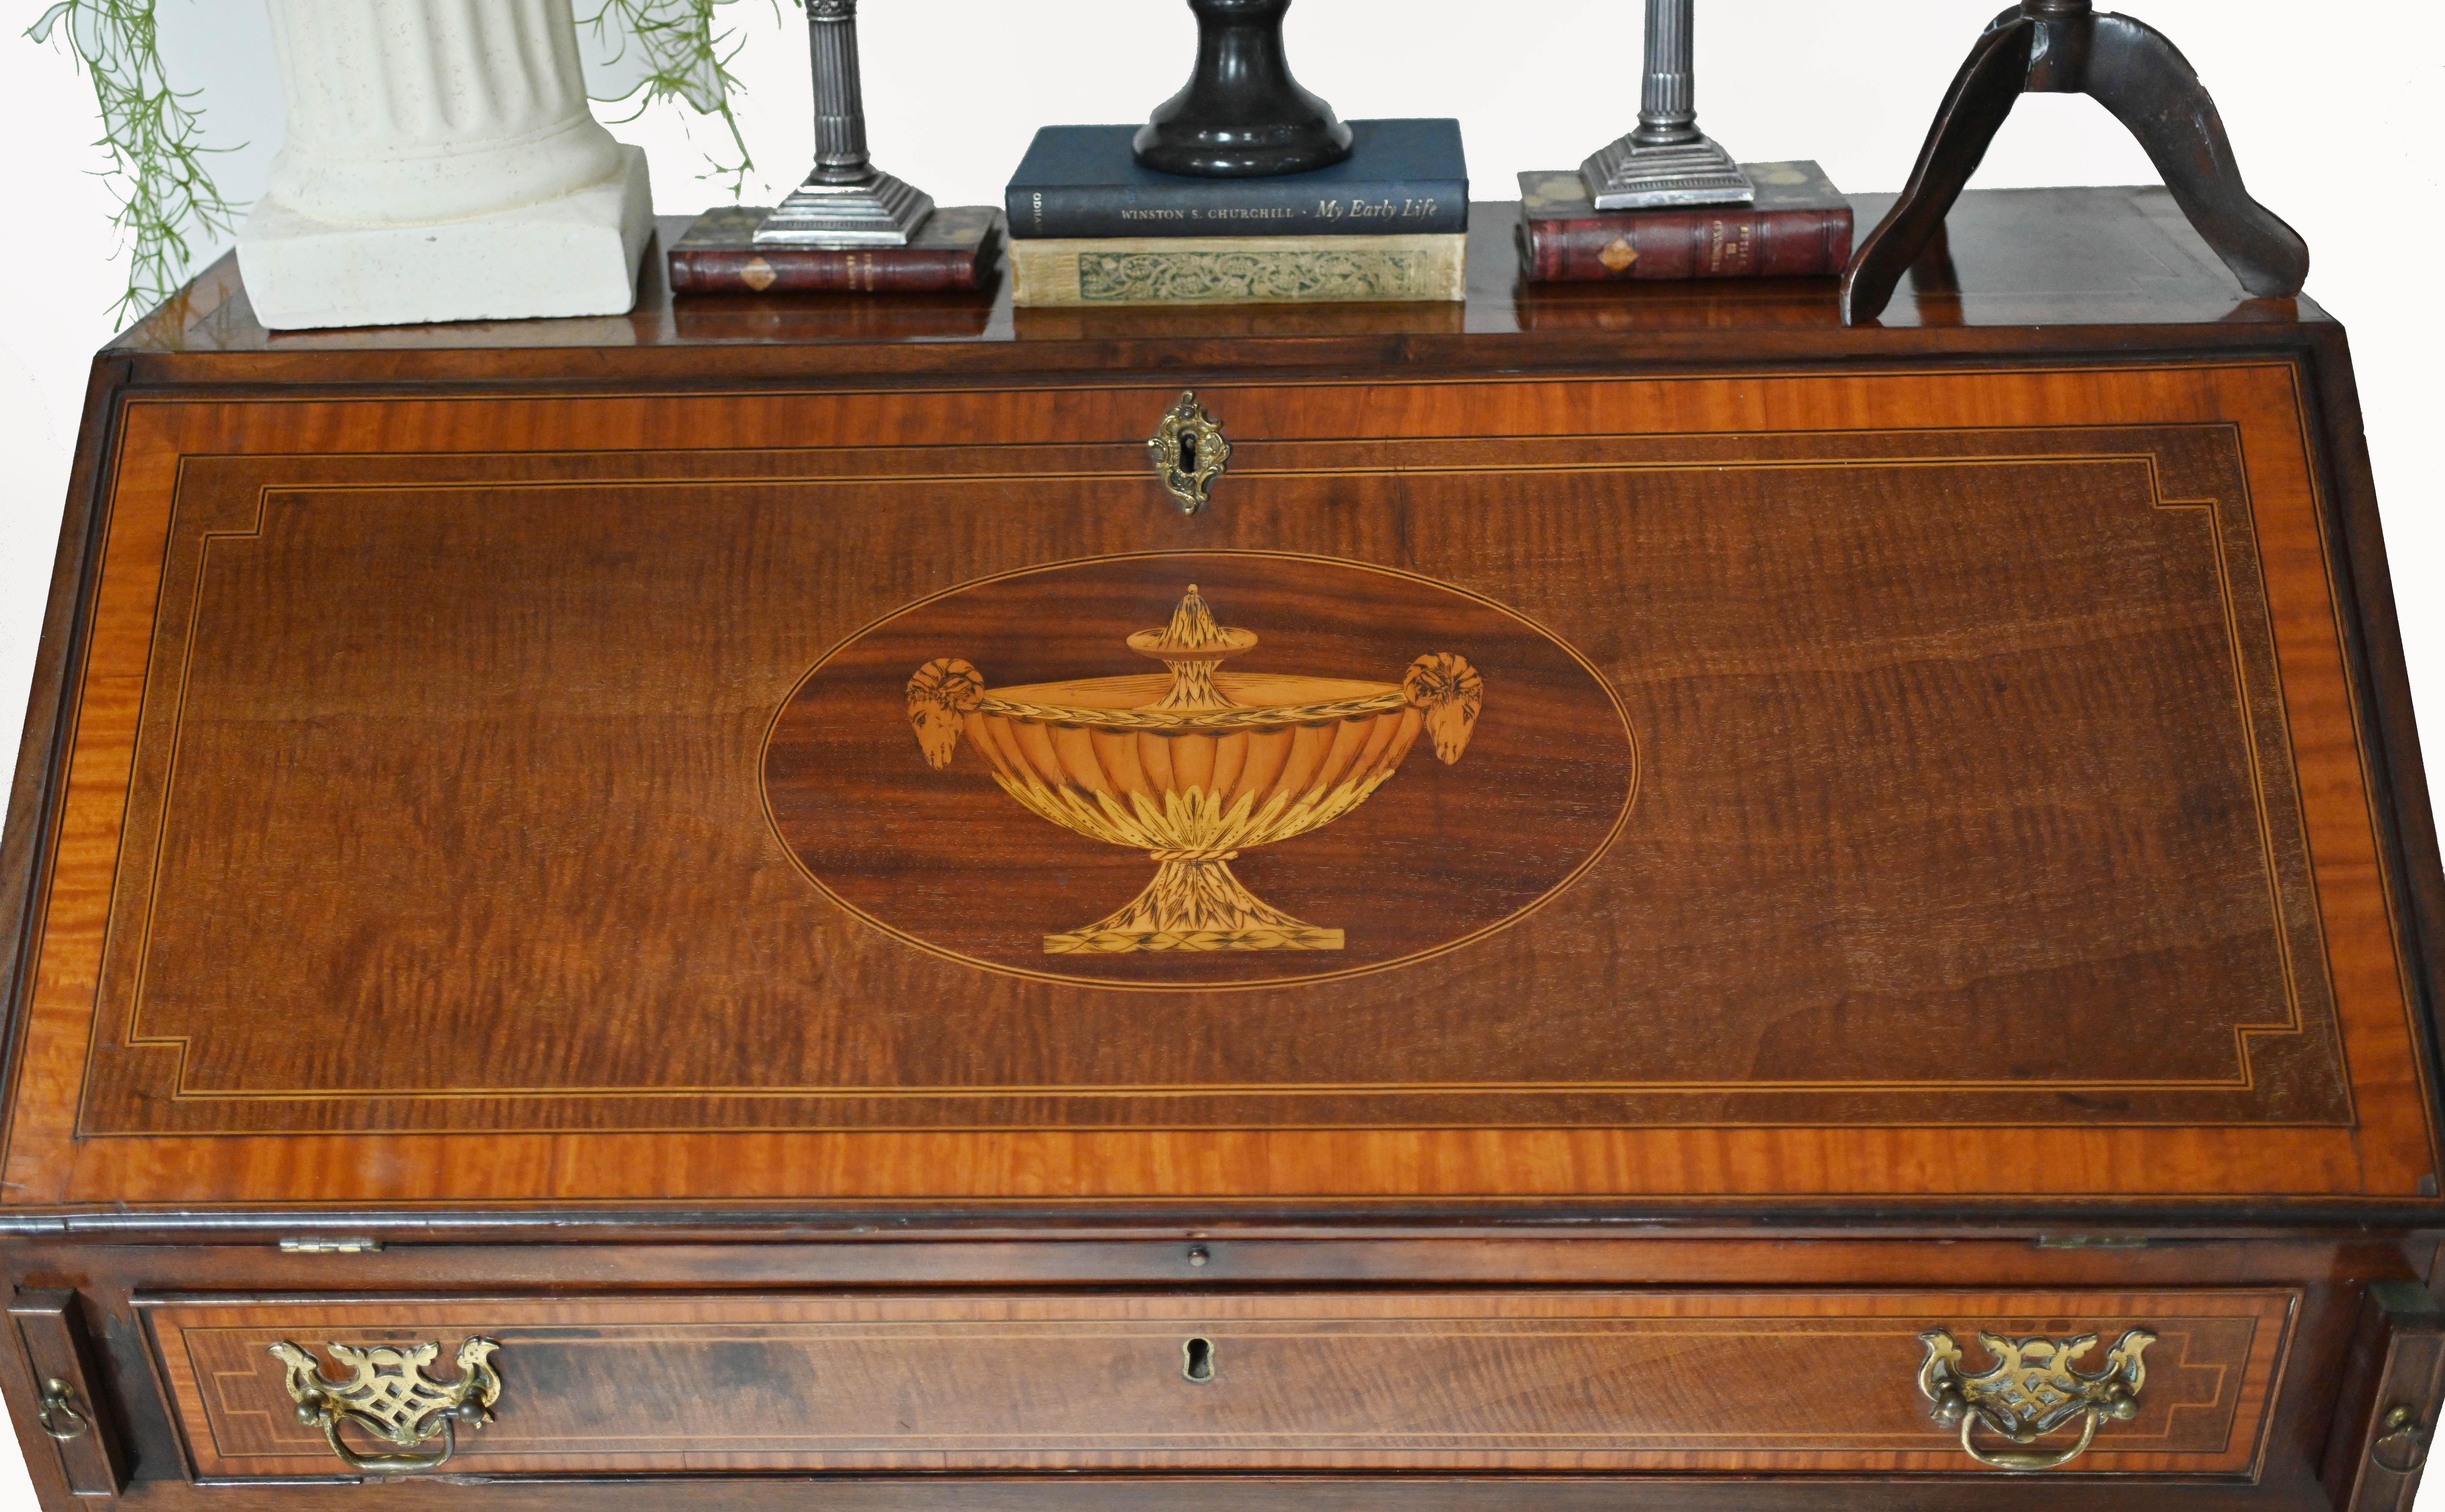 
Gorgeous George III bureau made by Edwards and Roberts of London (please see close up photo of the stamp)
A good quality George III bureau secretary in mahogany with original brass handles on bracket feet
Inlay work to centre of panel shows a